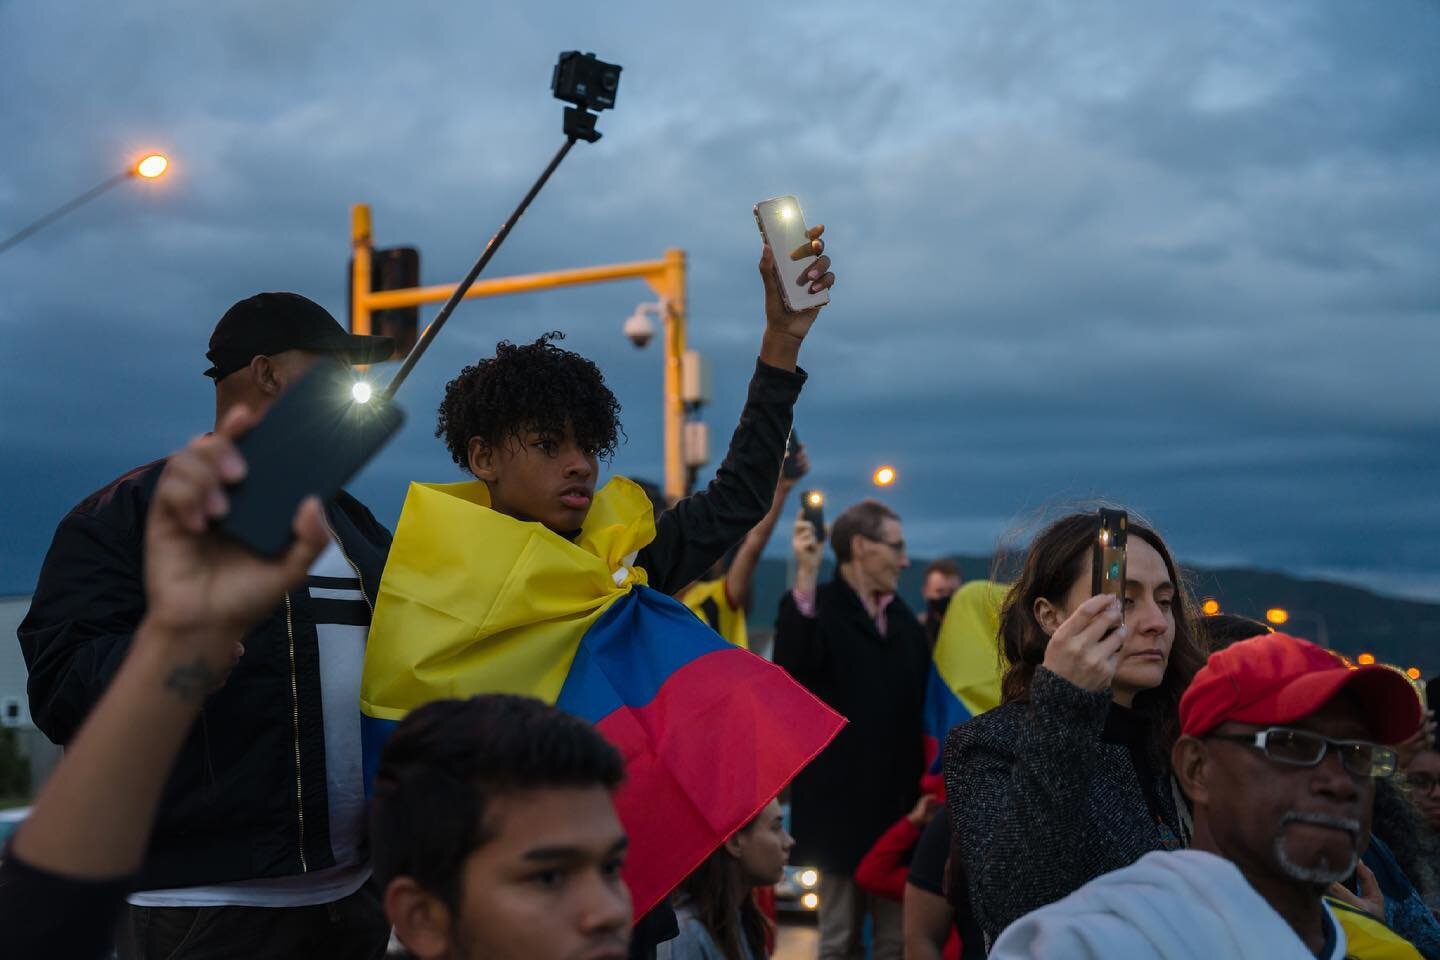 This was the demonstration in Petone, Wellington in support of the people who are currently suffering the corruption and brutality of the government and police. It&rsquo;s heartbreaking witnessing this happening mi Colombia Querida.
.
.
.
.
.
#soscol